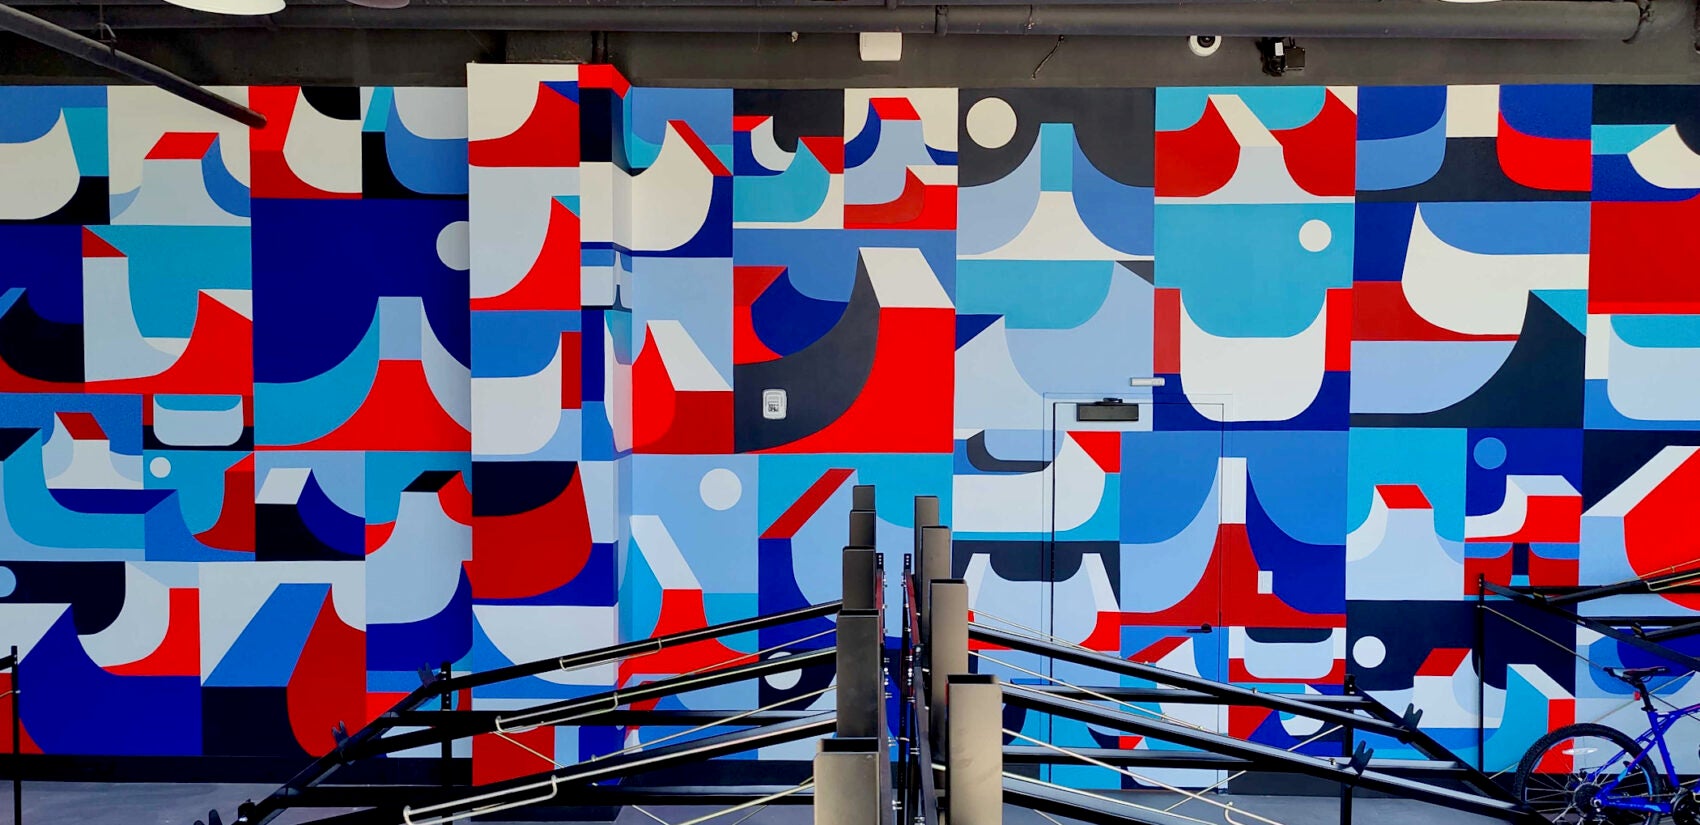 The bicycle parking room of The Noble apartment building features an abstract grid of skateboard ramps painted by Philadelphia artist Jim Houser. (Peter Crimmins/WHYY)